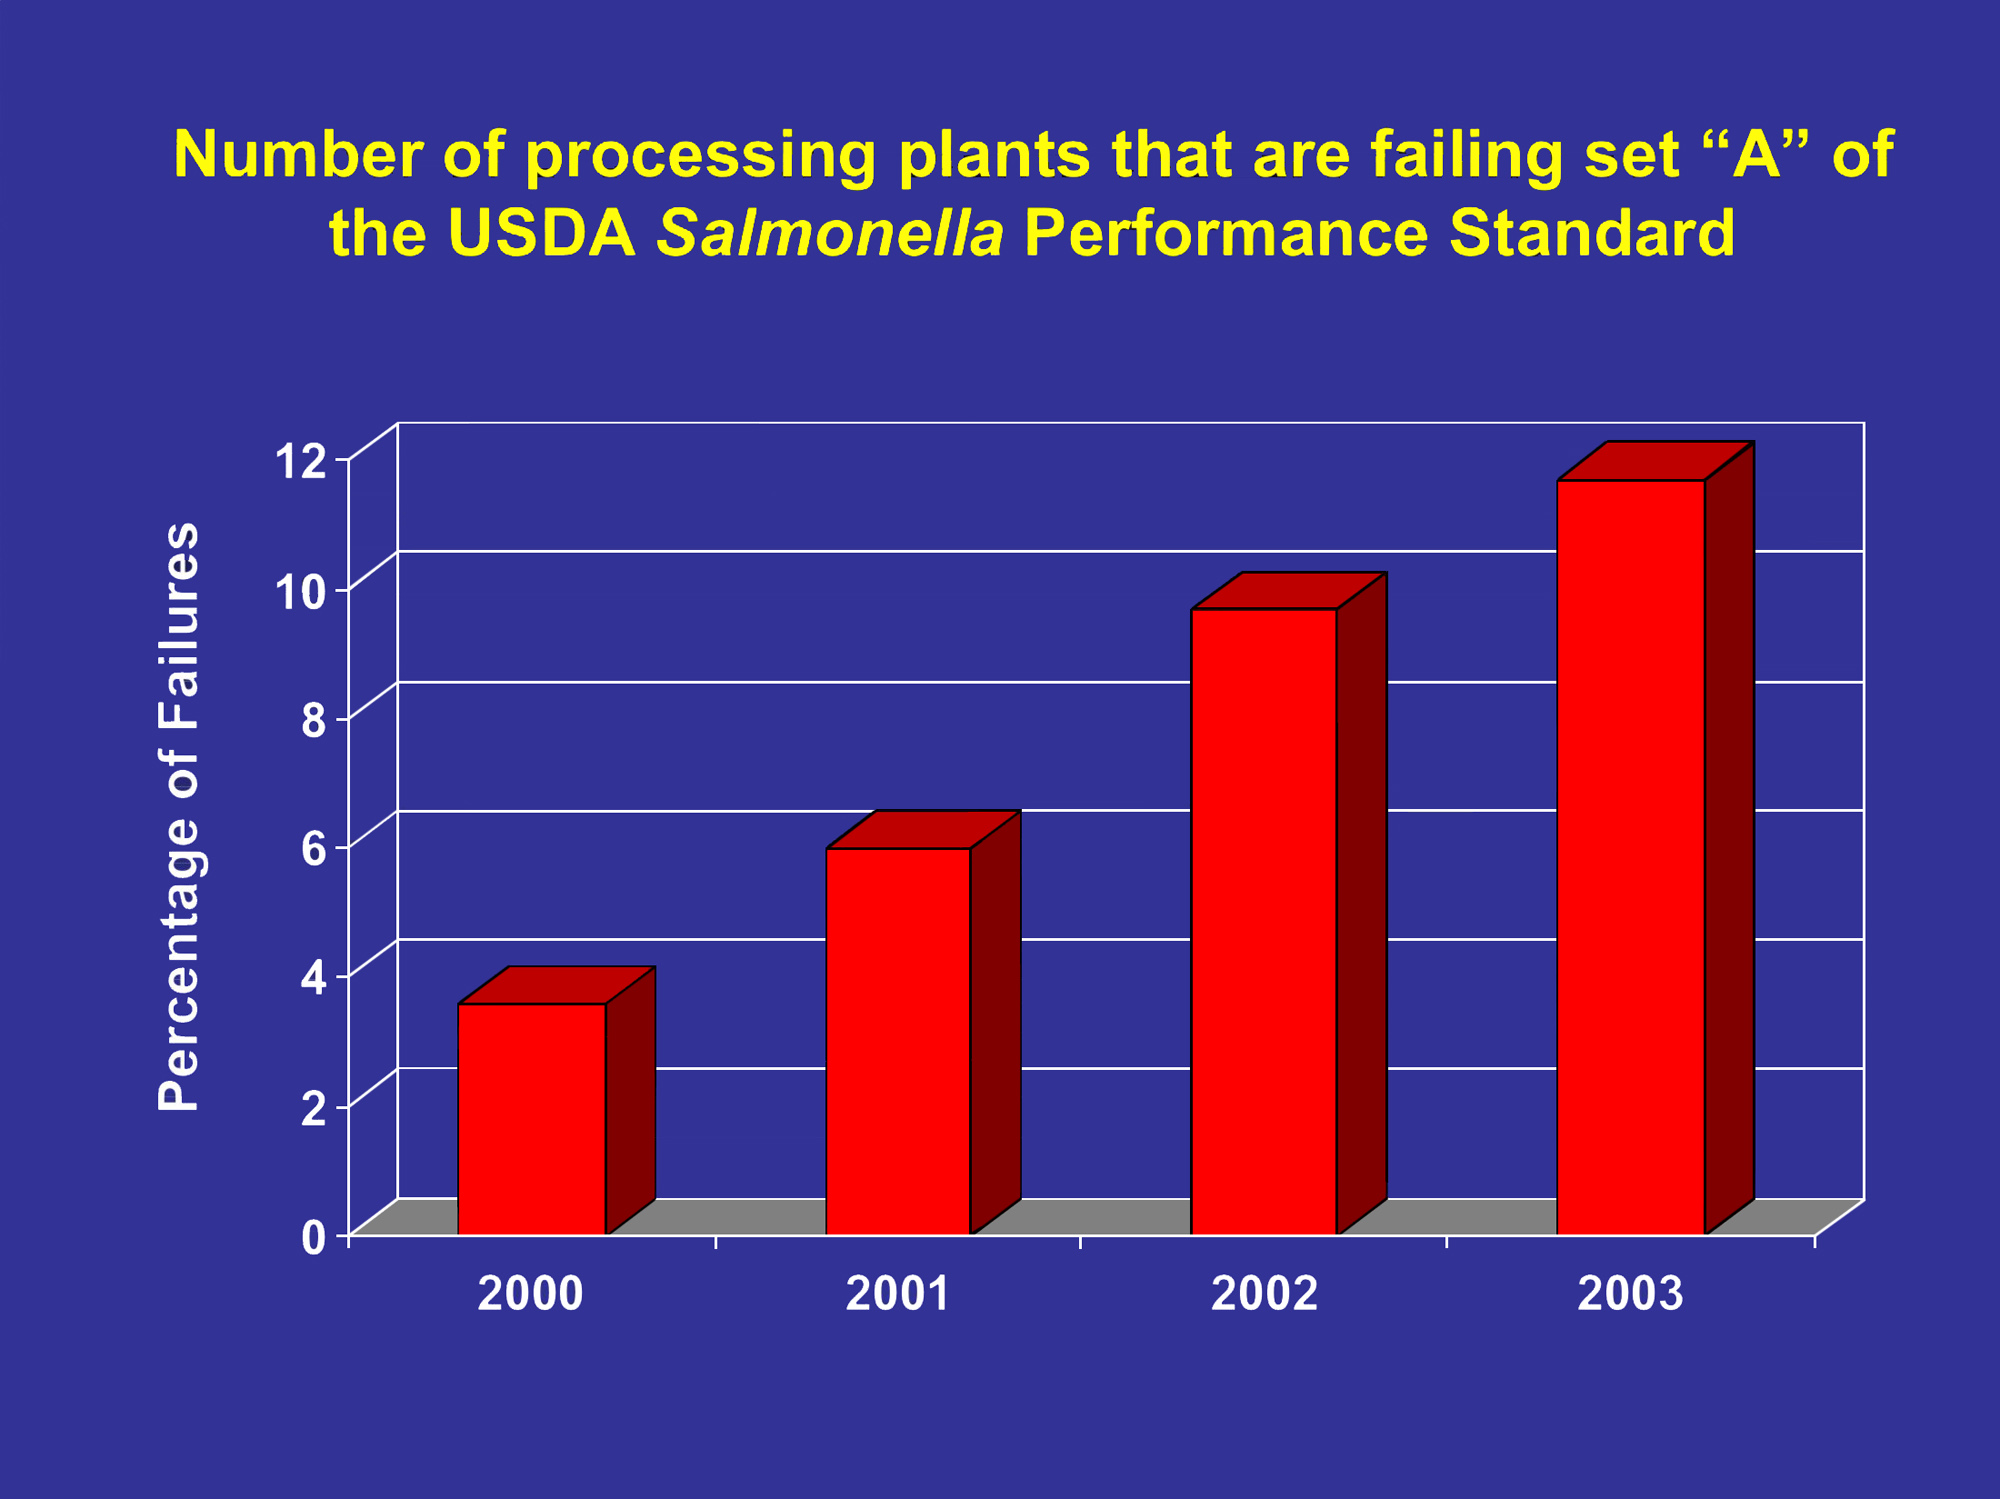 Bar graph showing the percentage of processing plants failing set "A" of USDA Salmonella Performance Standard from 2000 to 2003. Percent increases from around 3.5% in 2000 to about 12% in 2003